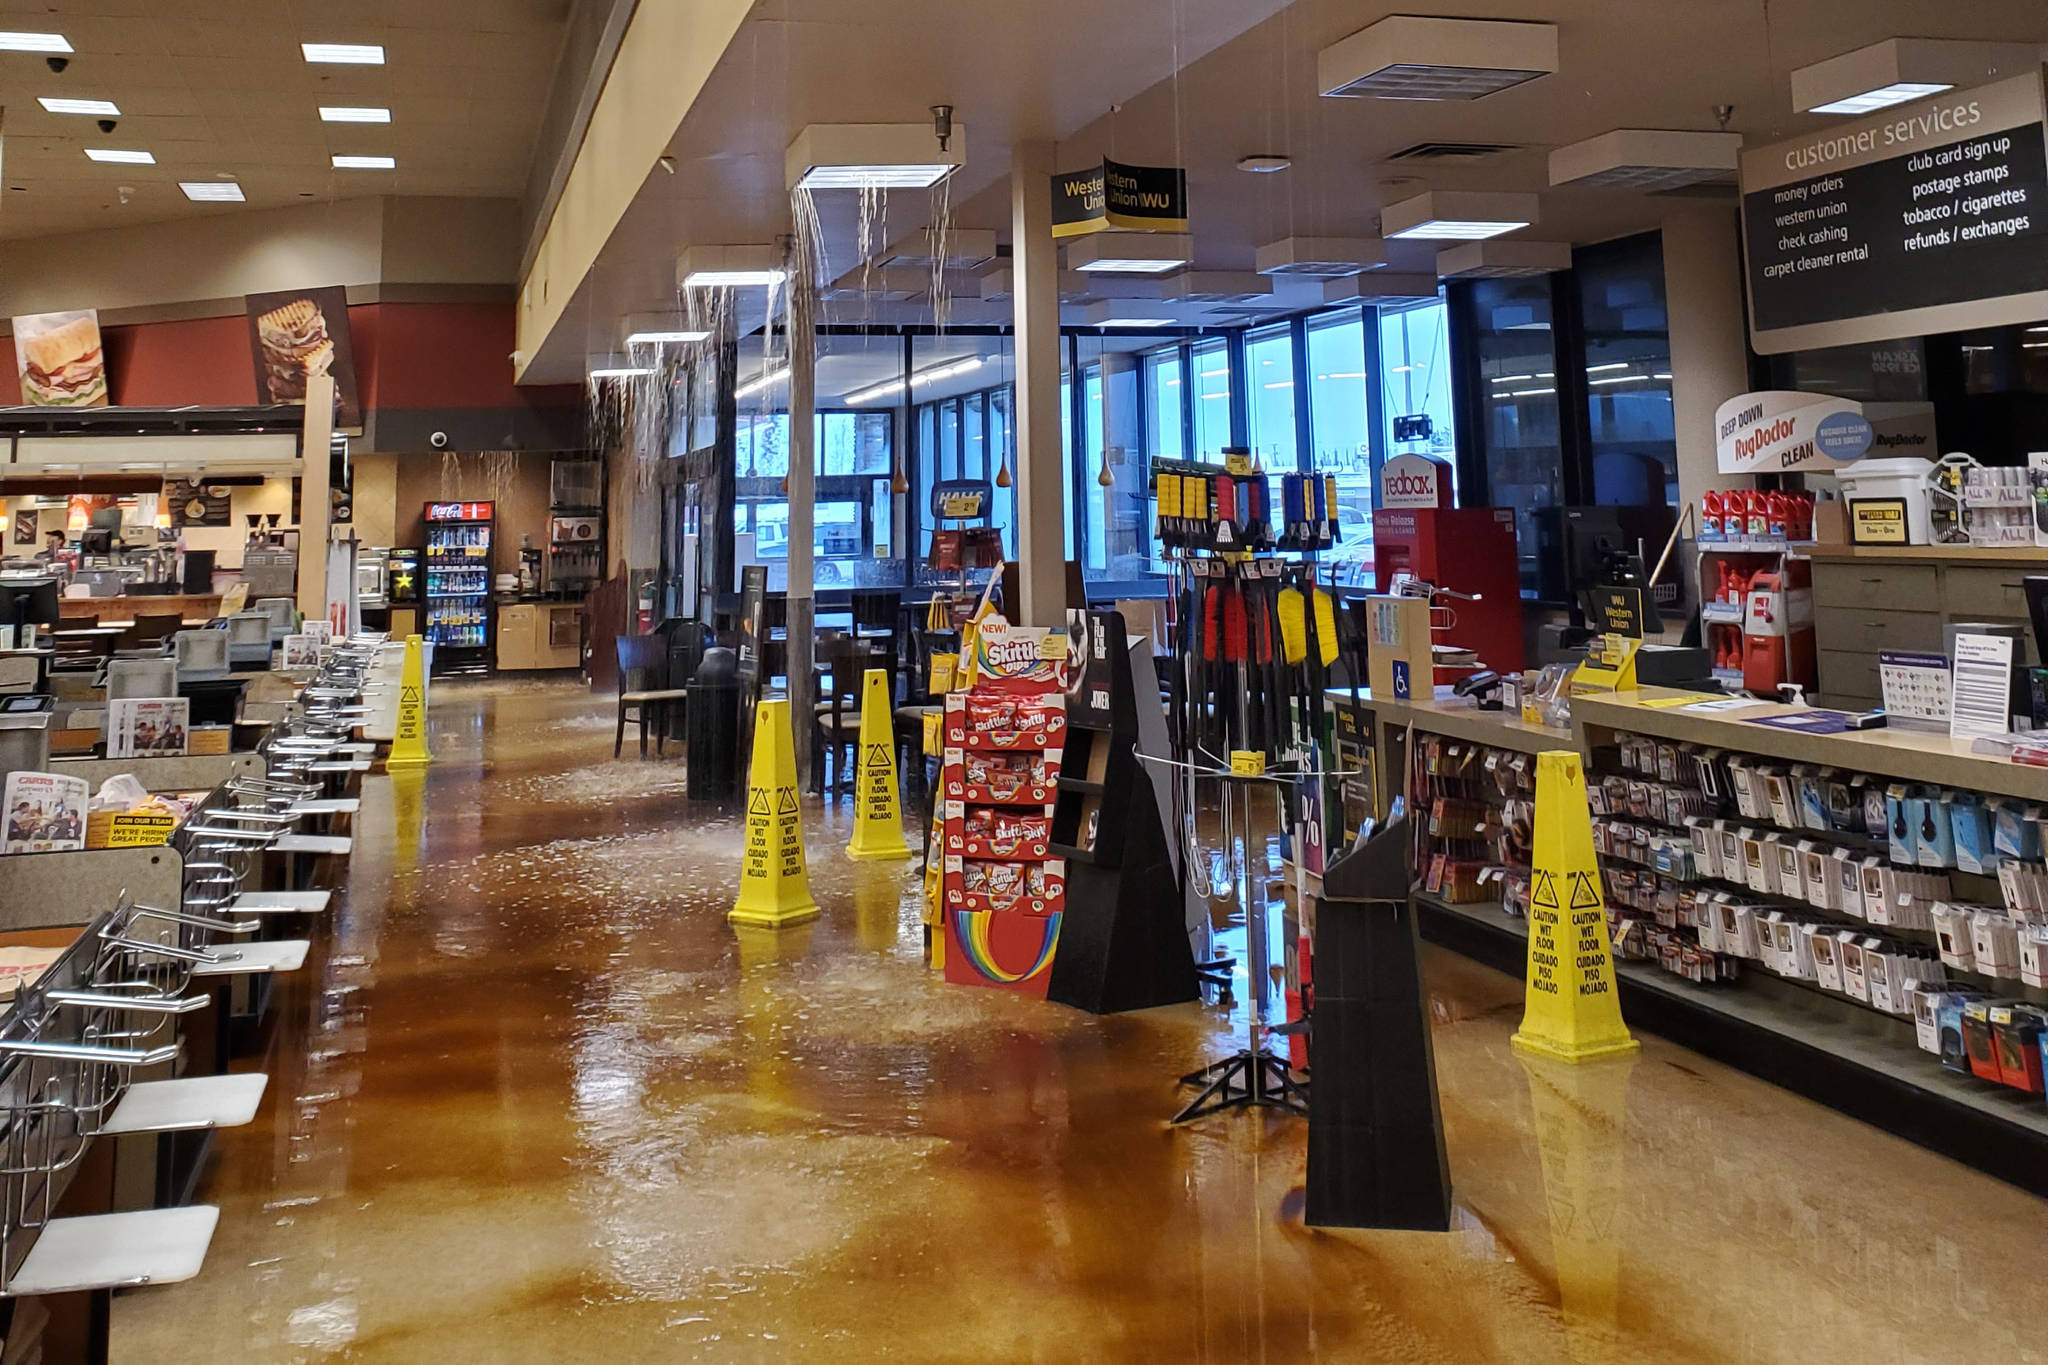 Flooding in Safeway can be seen here in Soldotna, Alaska, on Jan. 13, 2020. (Photo courtesy Brooke Dobson/Central Emergency Services)